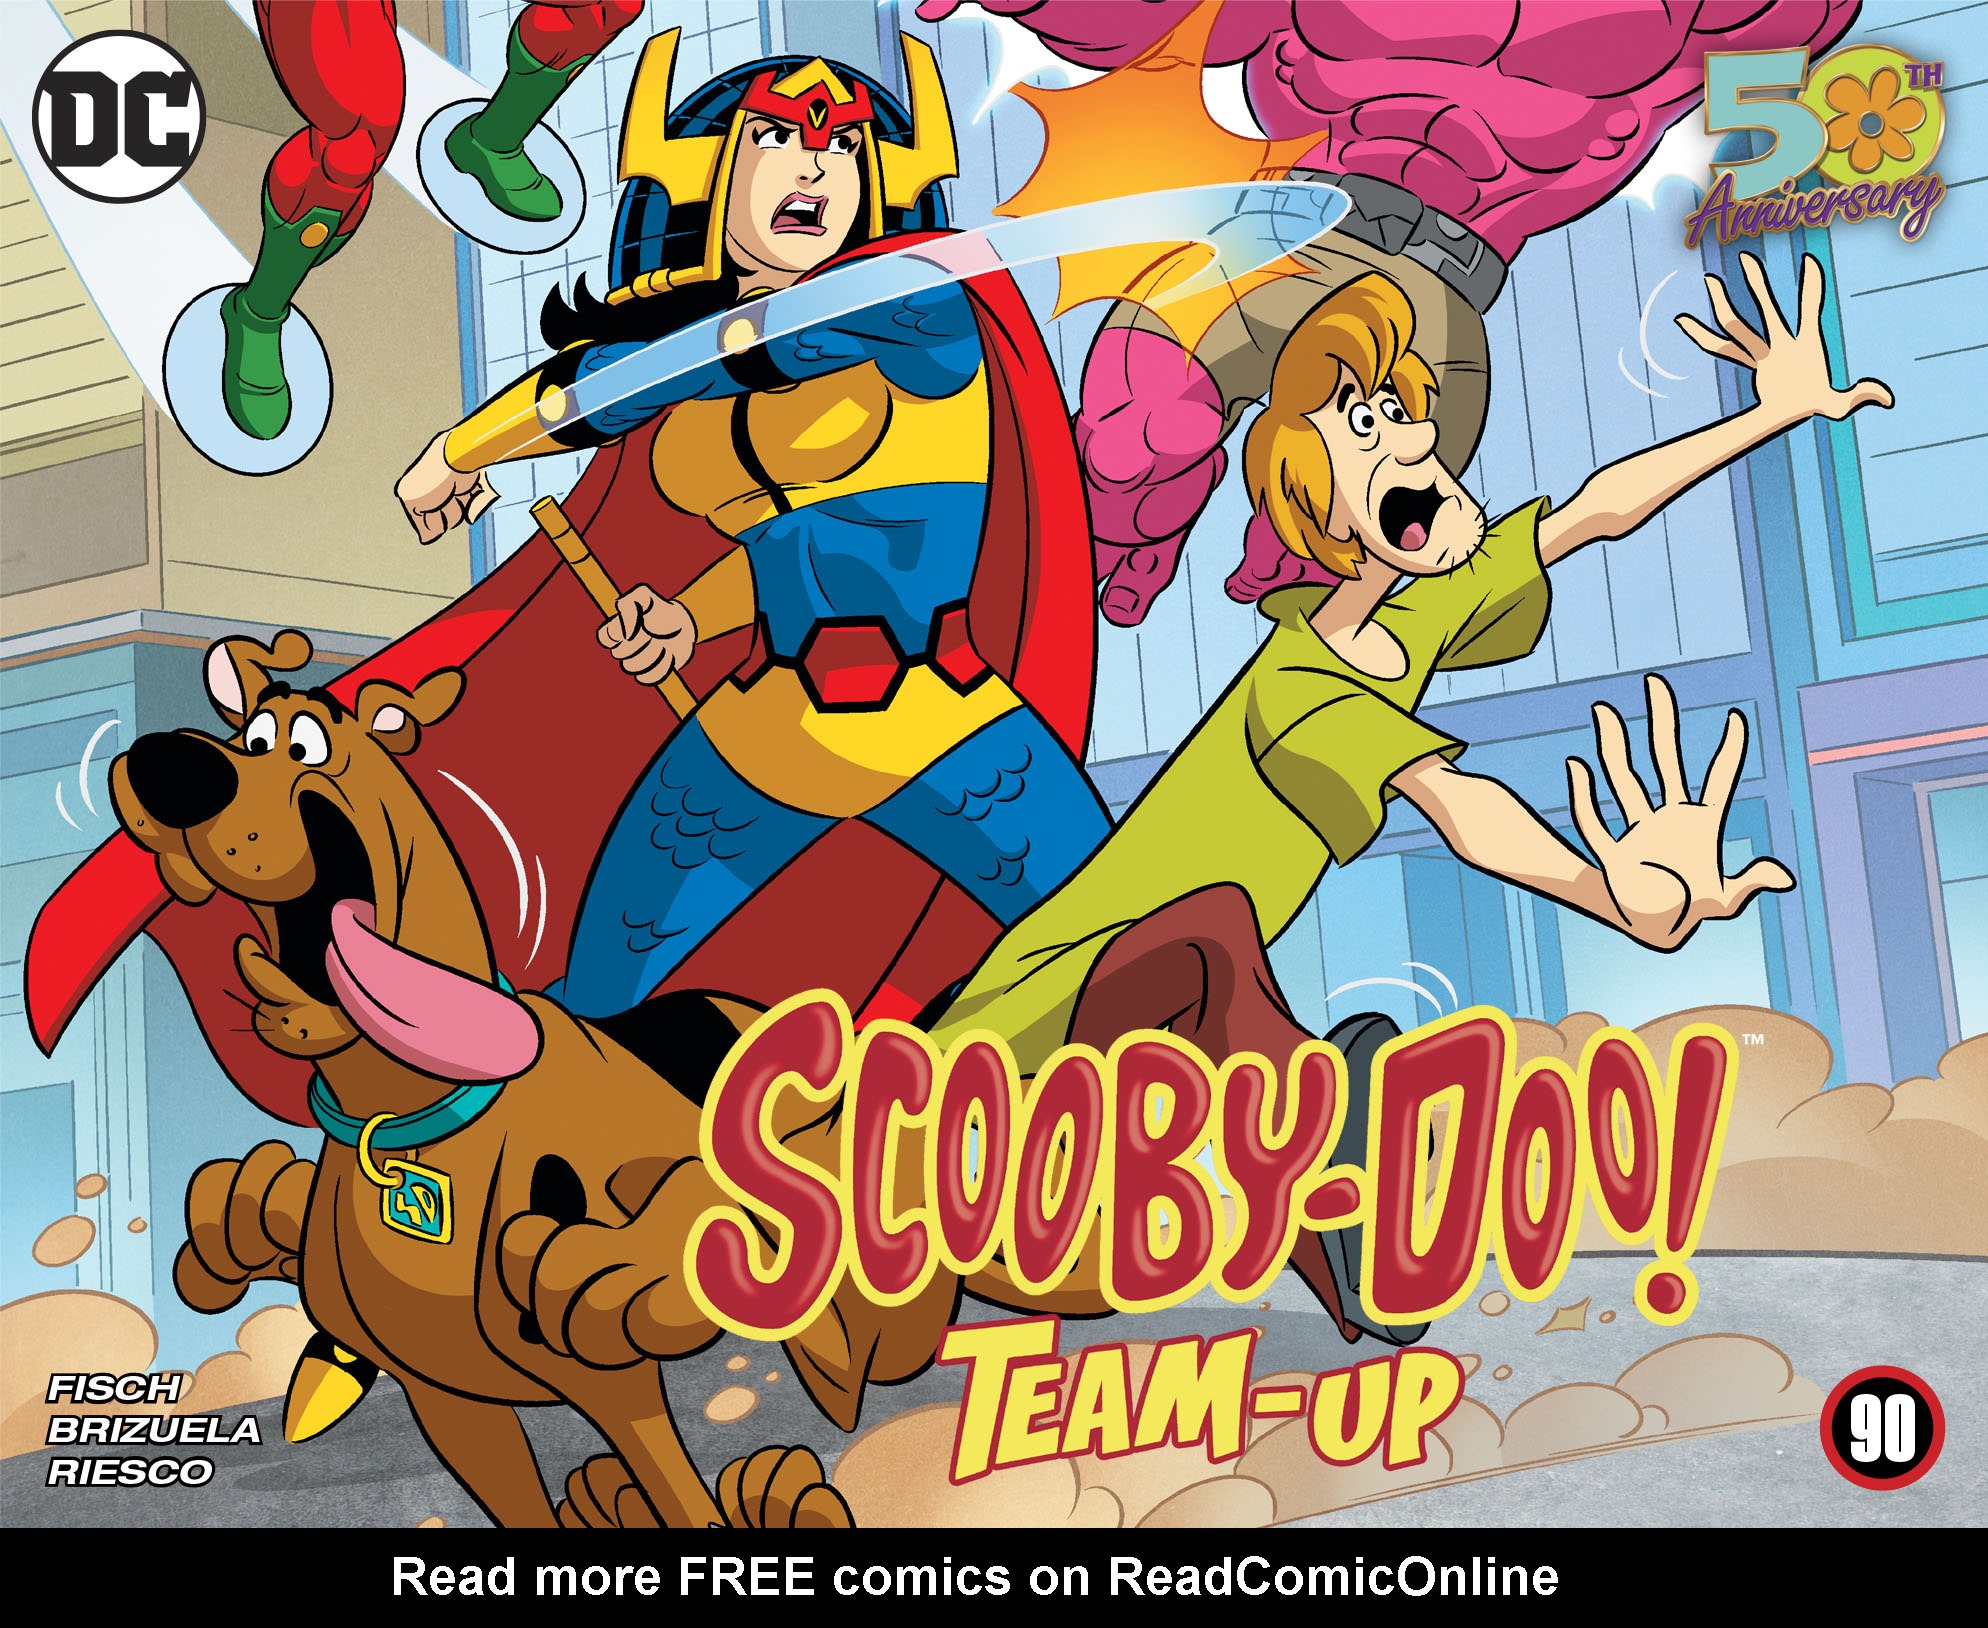 Read online Scooby-Doo! Team-Up comic -  Issue #90 - 1